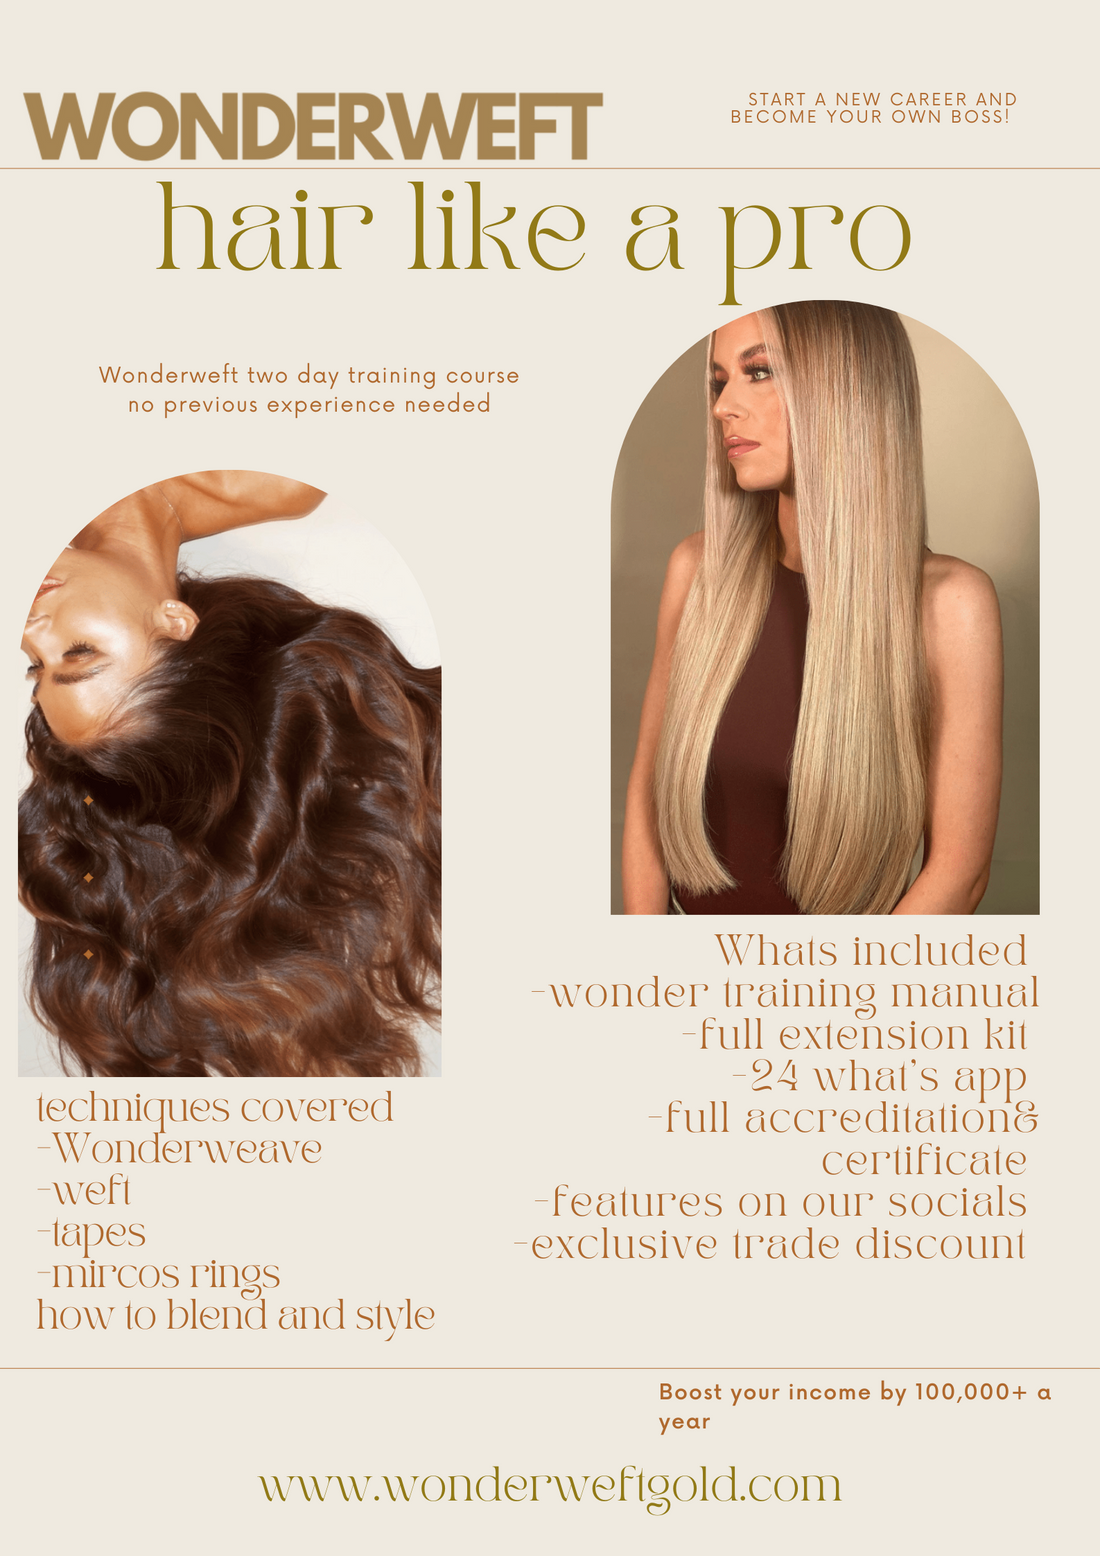 Hair like a pro training course